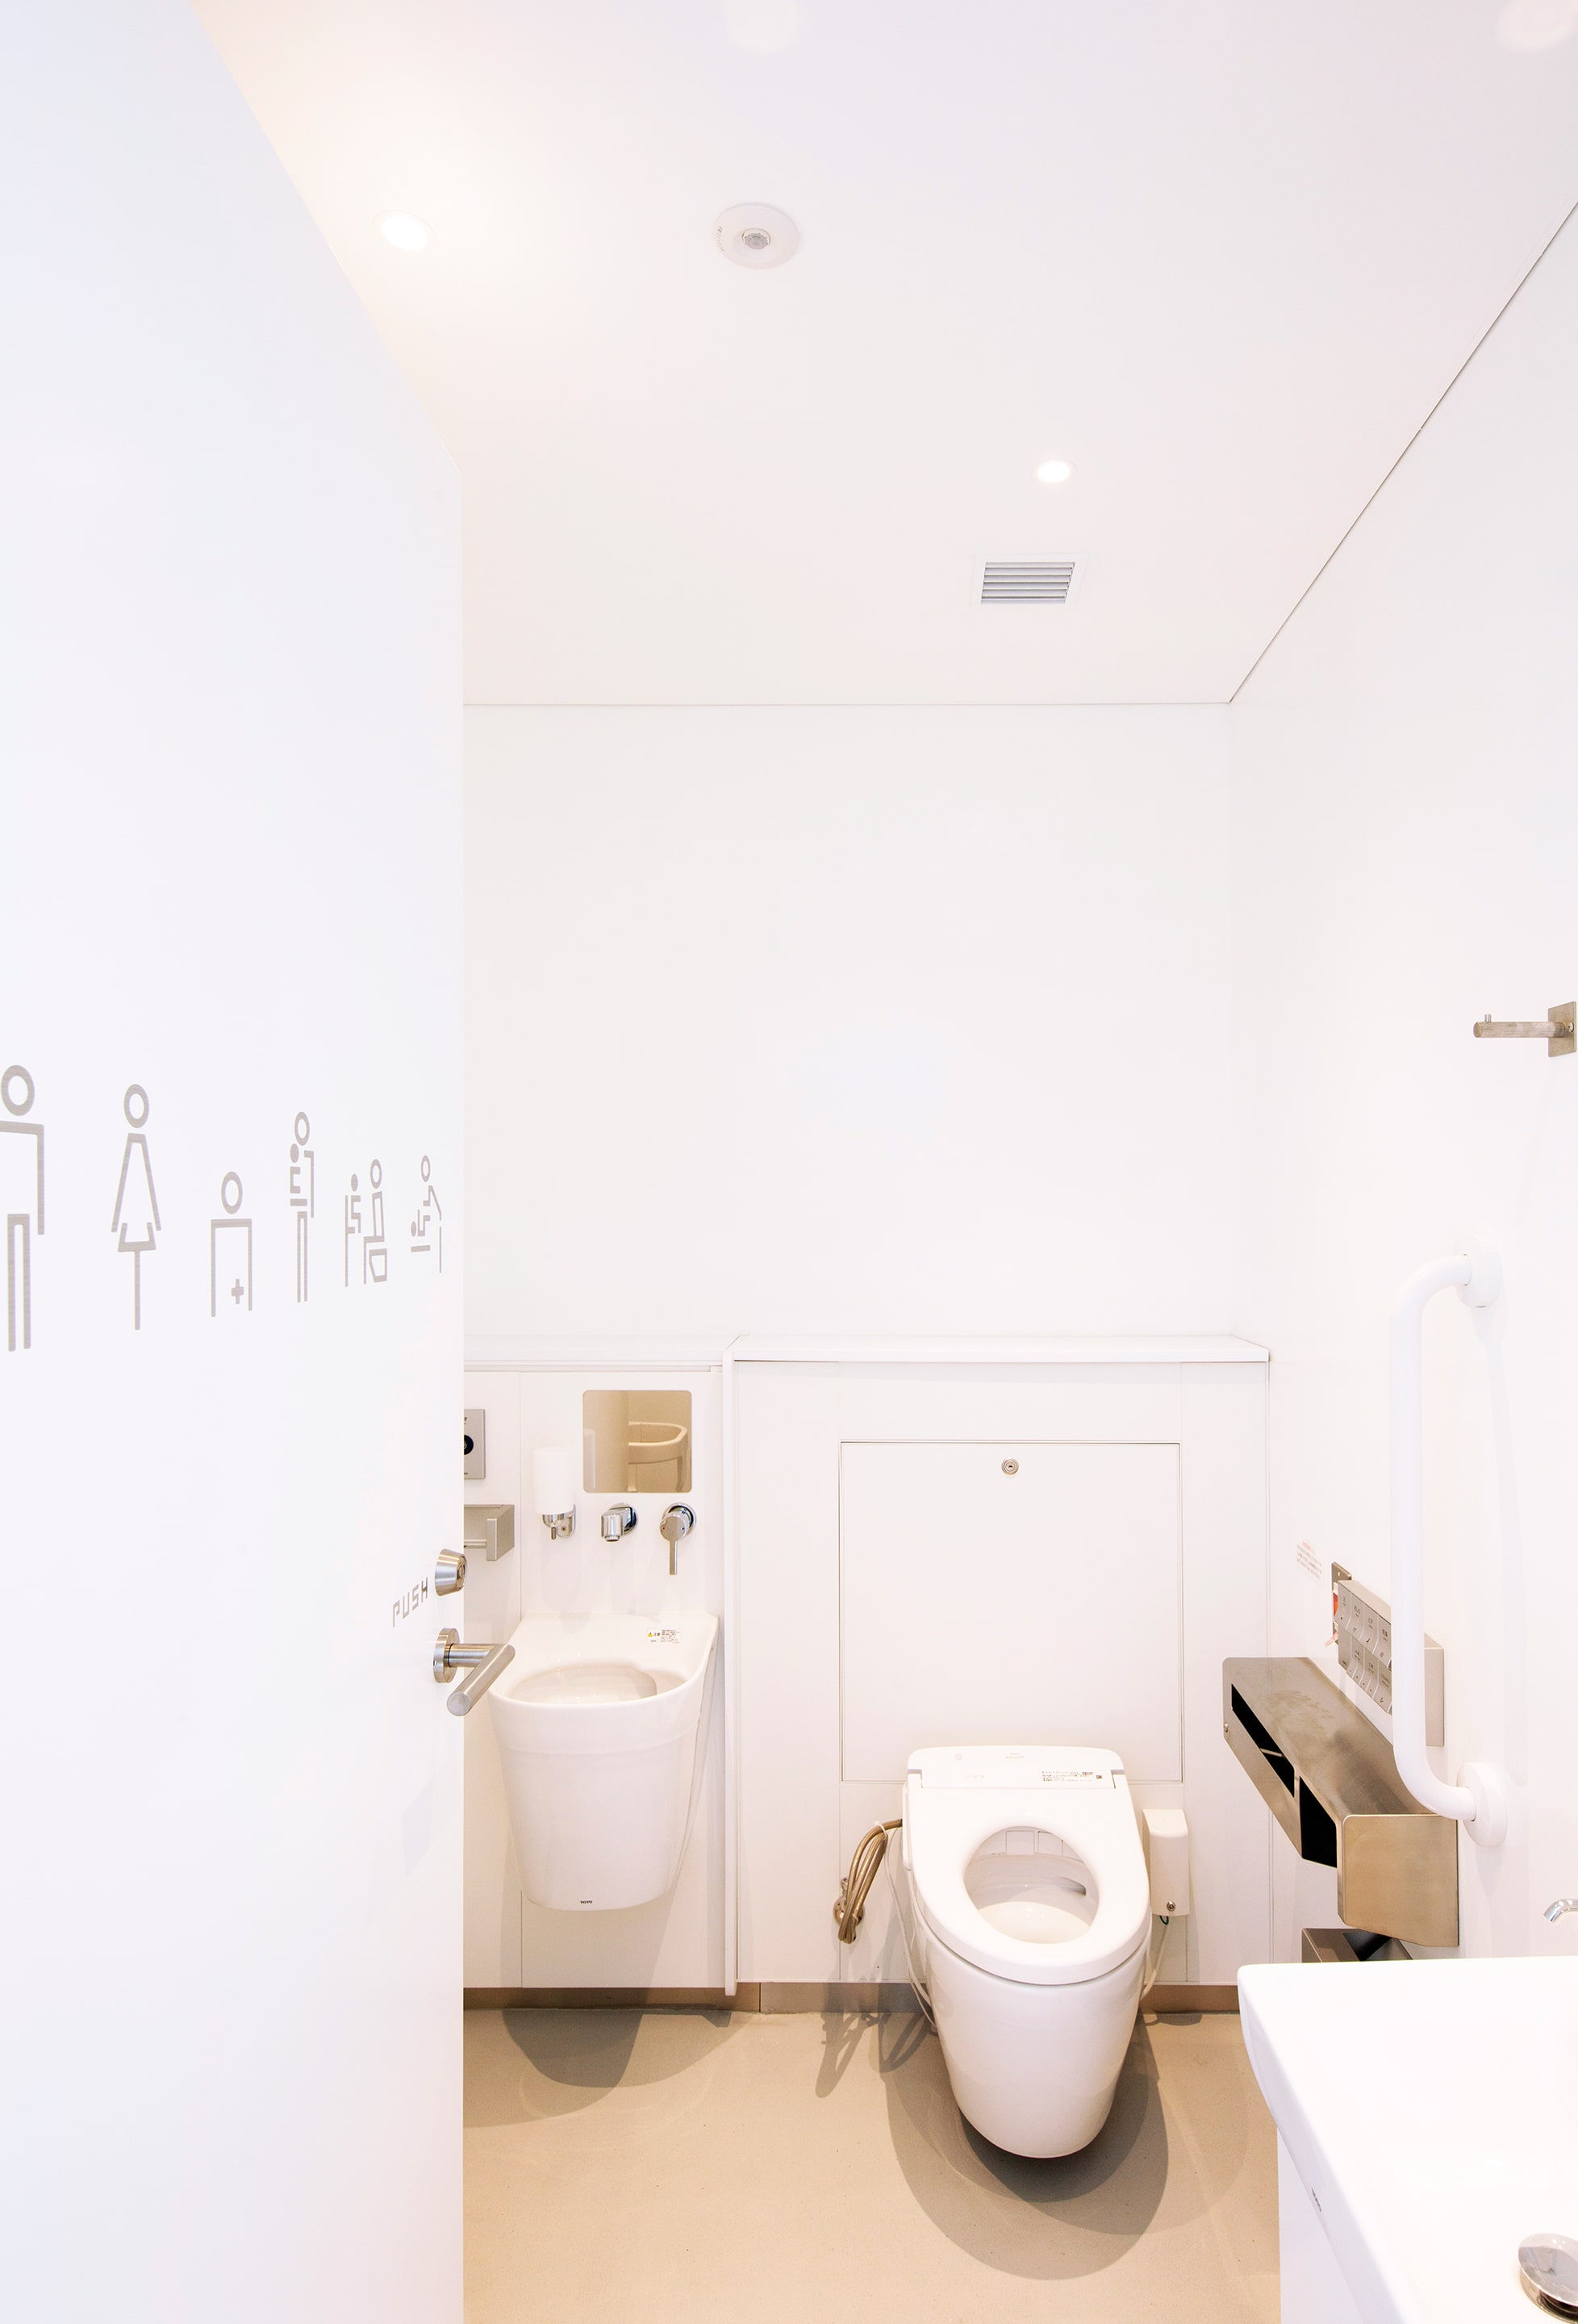 Far from Being Shabby and Unkempt, The Tokyo Toilets are a Breakthrough for Clean White Public Facilities